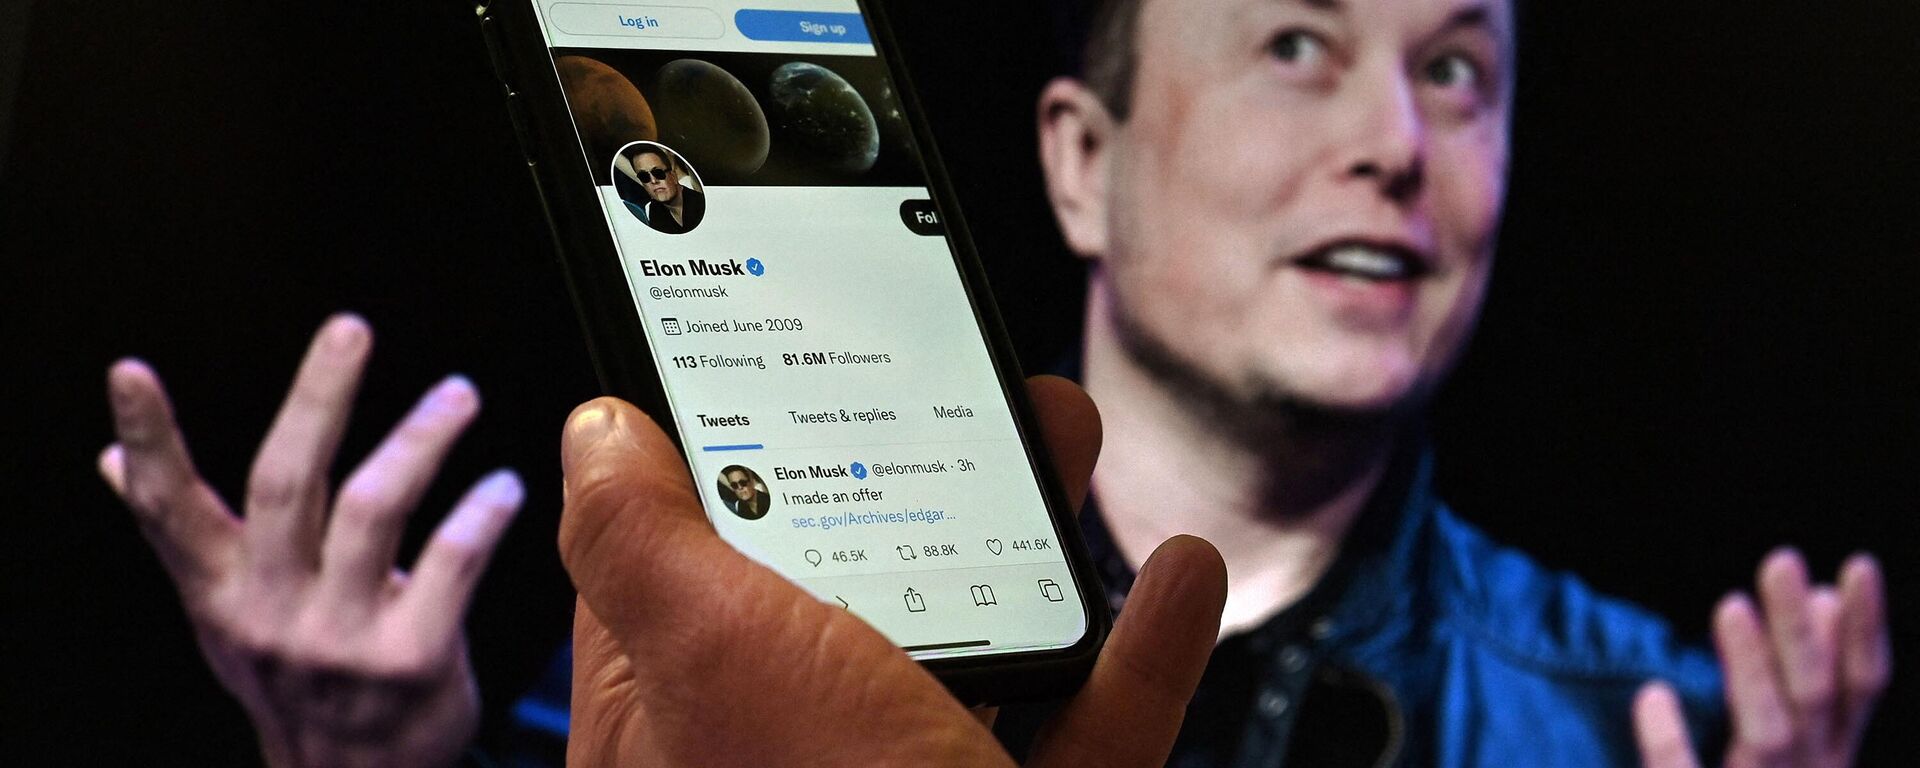 (FILES) In this file photo illustration taken on April 14, 2022 a phone screen displays the Twitter account of Elon Musk with a photo of him shown in the background, in Washington, DC.  - Sputnik International, 1920, 26.11.2022